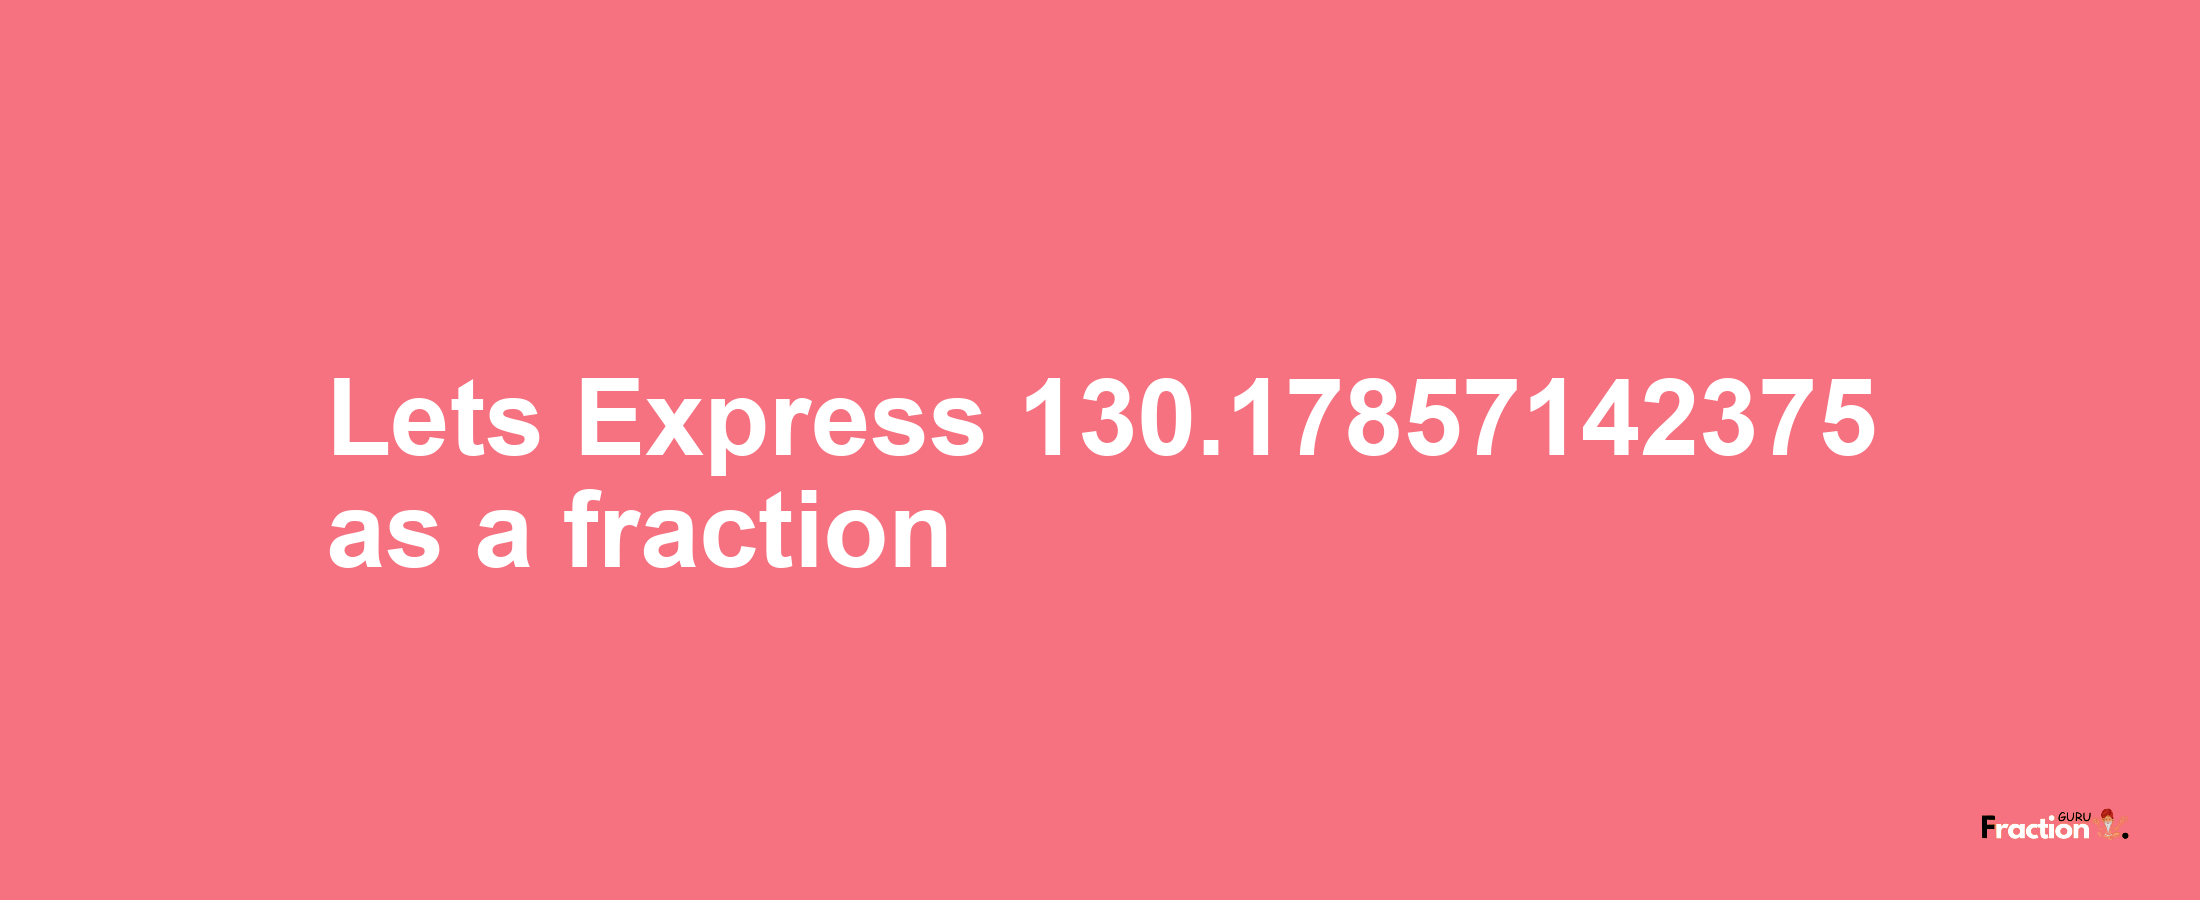 Lets Express 130.17857142375 as afraction